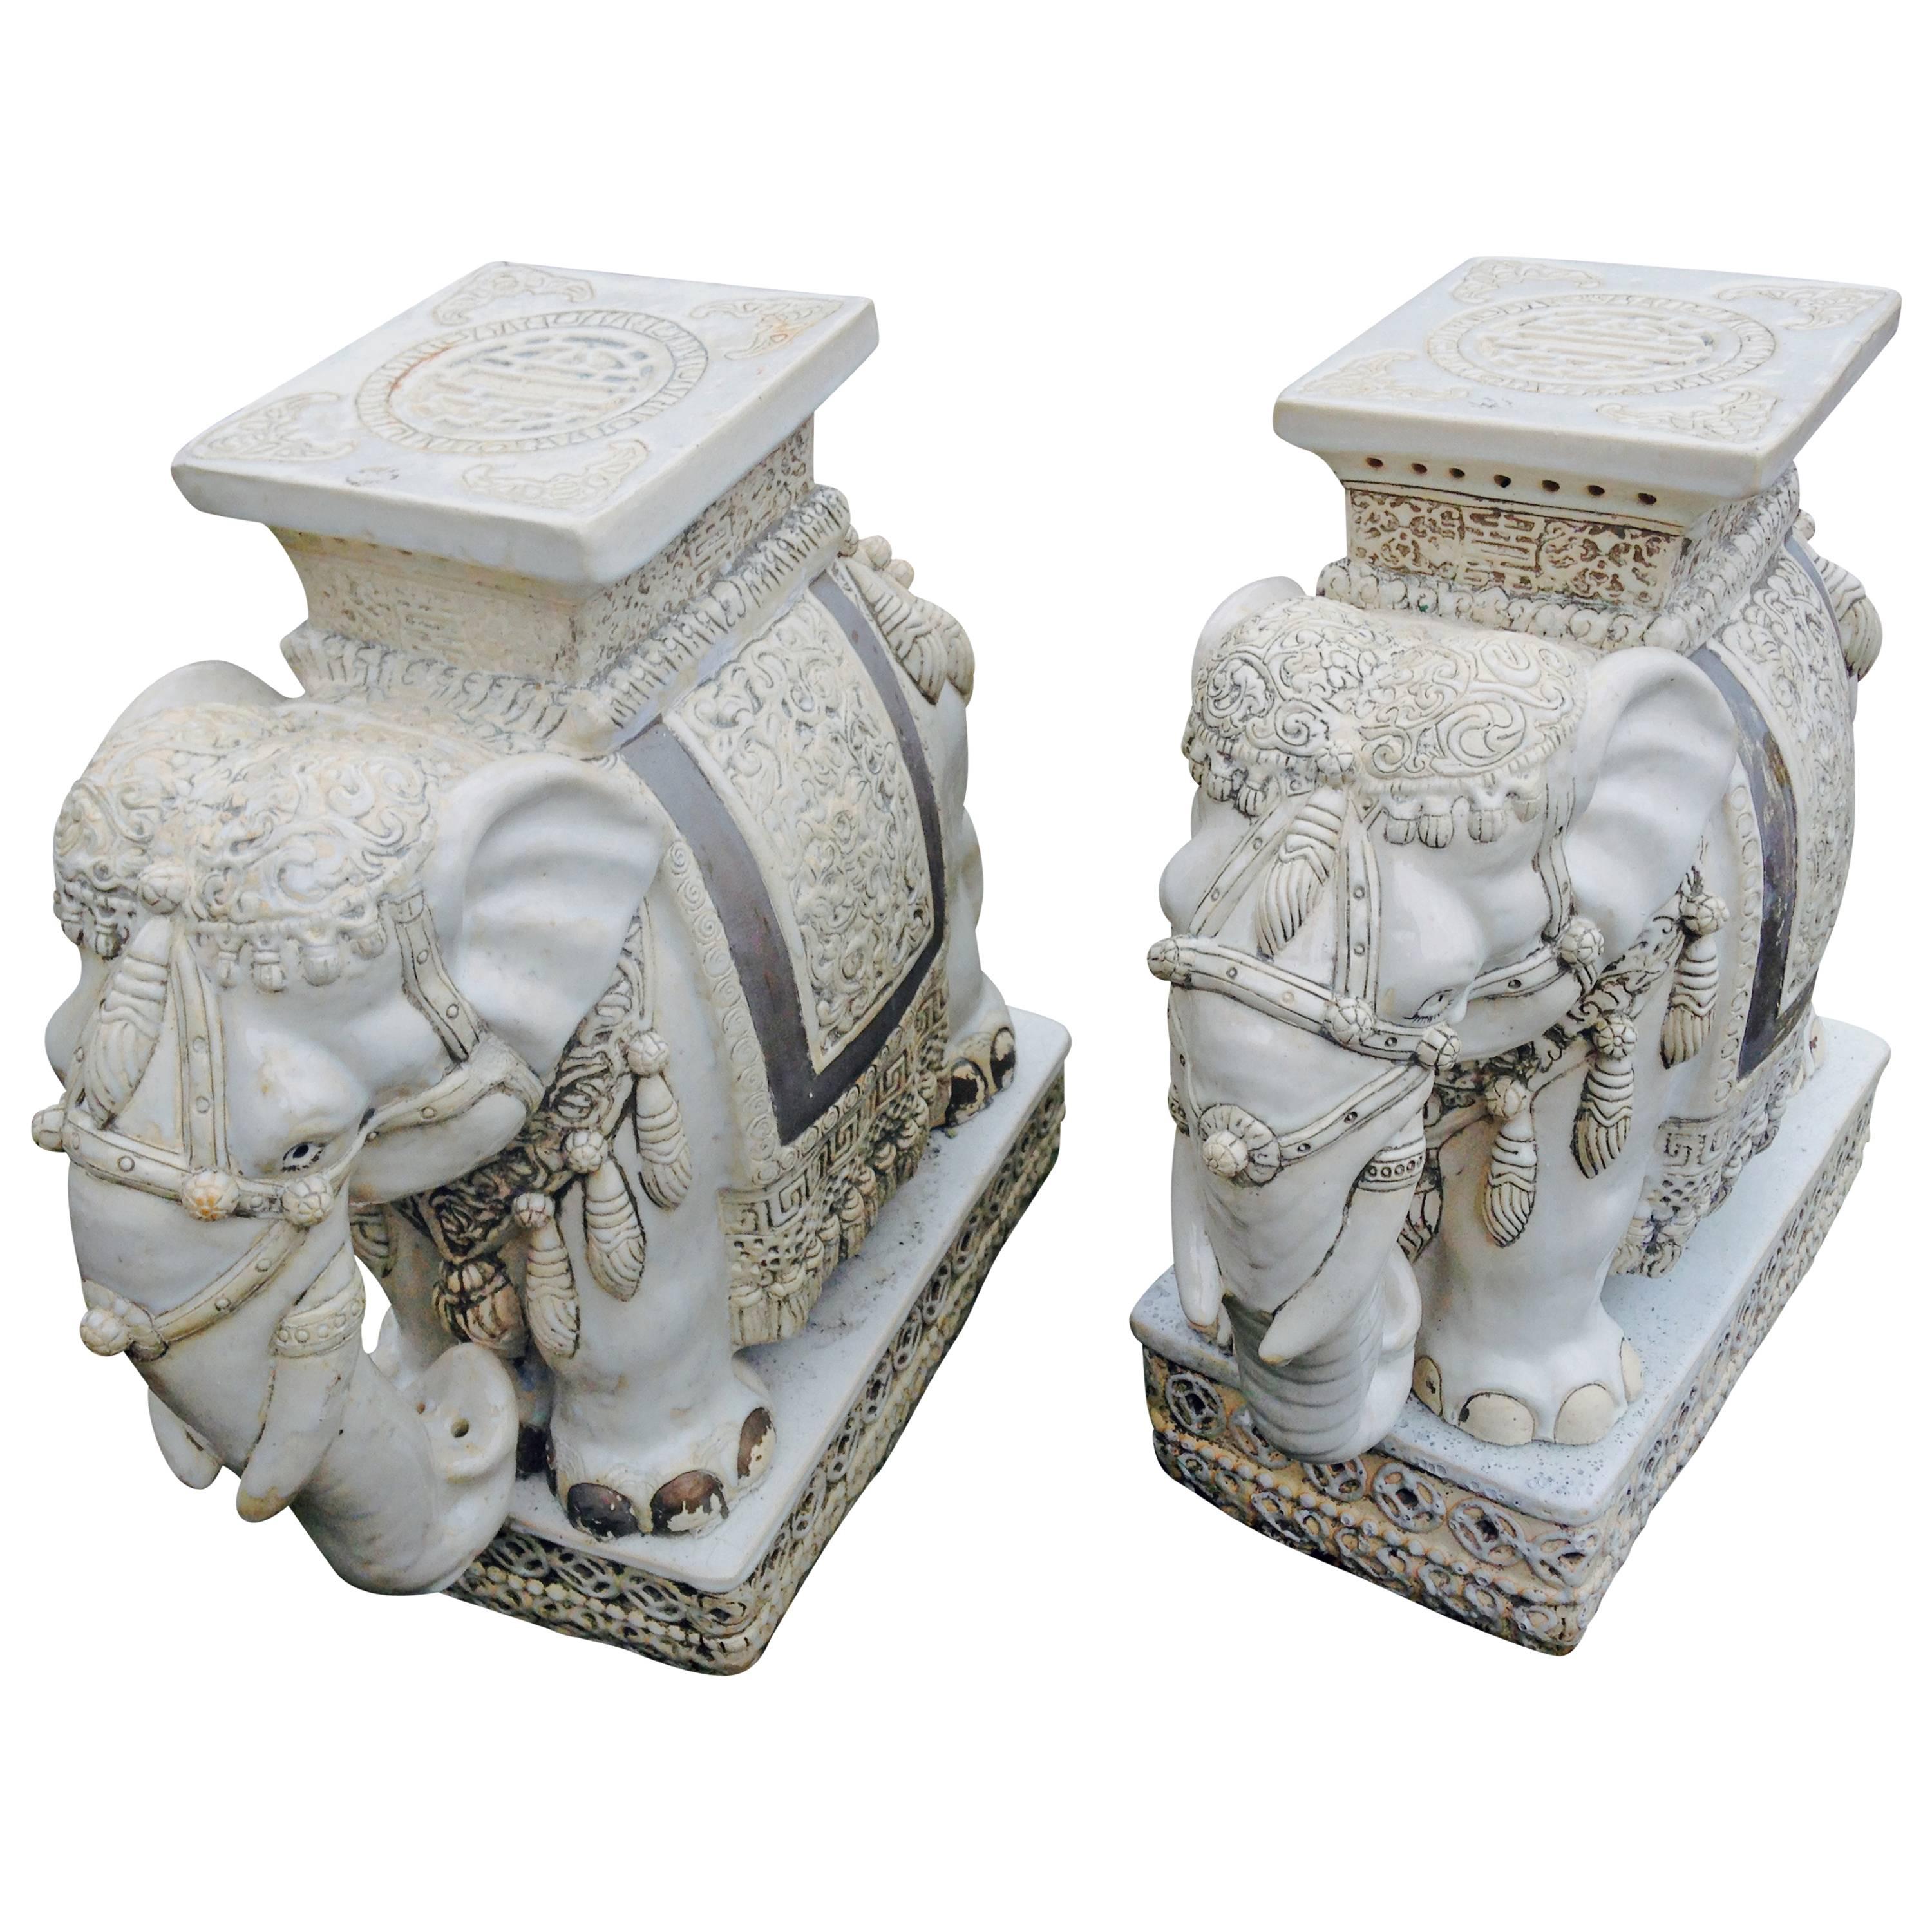 Monumental Elephant End Tables Antiques from Important Estate